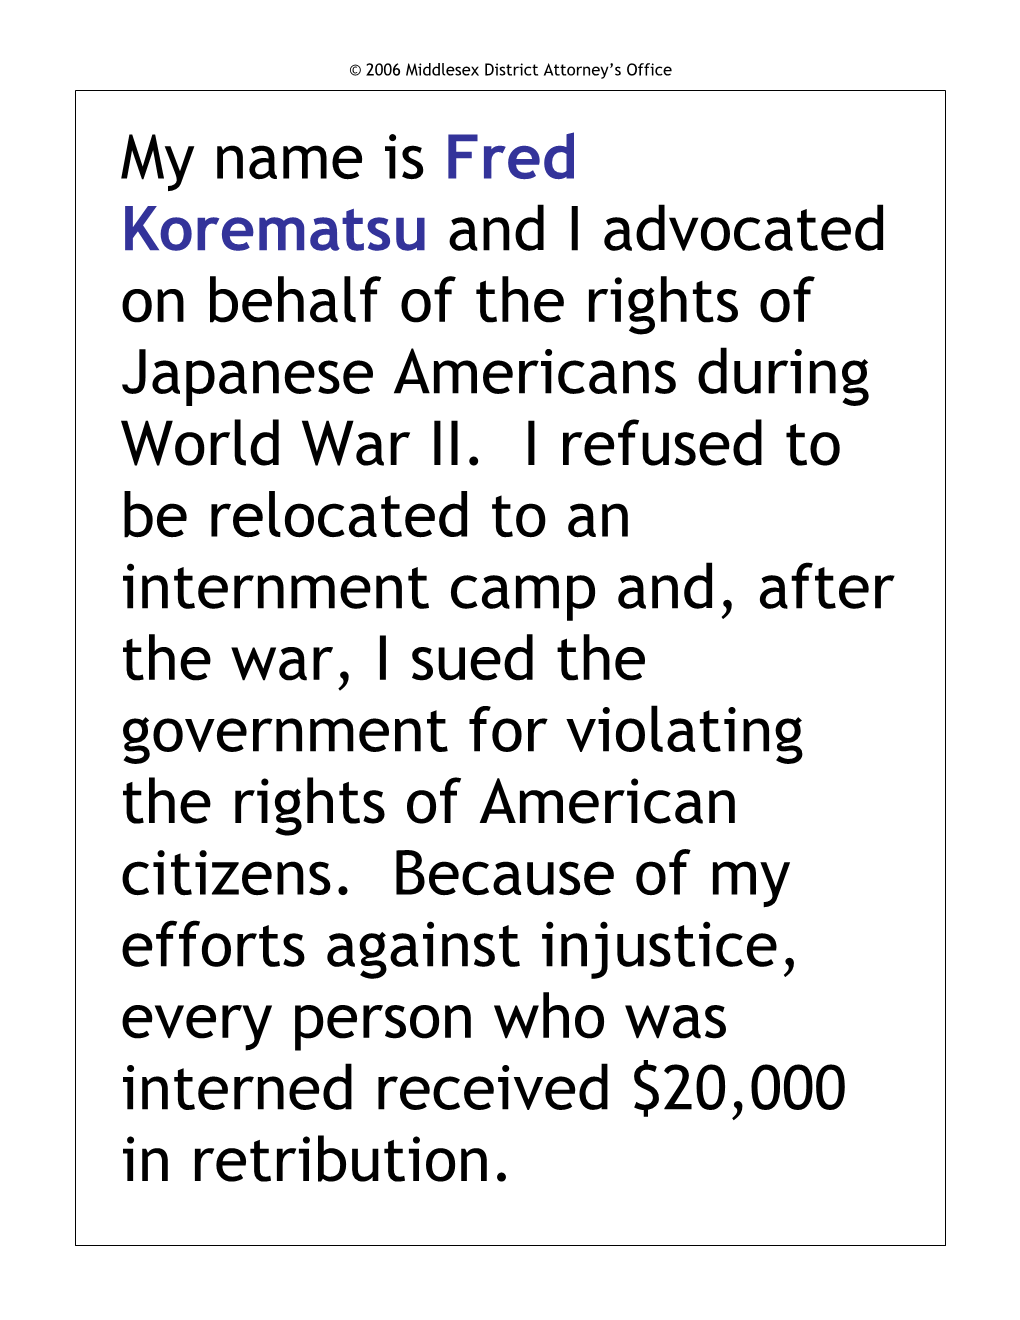 My Name Is Fred Korematsu and I Advocated on Behalf of the Rights of Japanese Americans During World War II